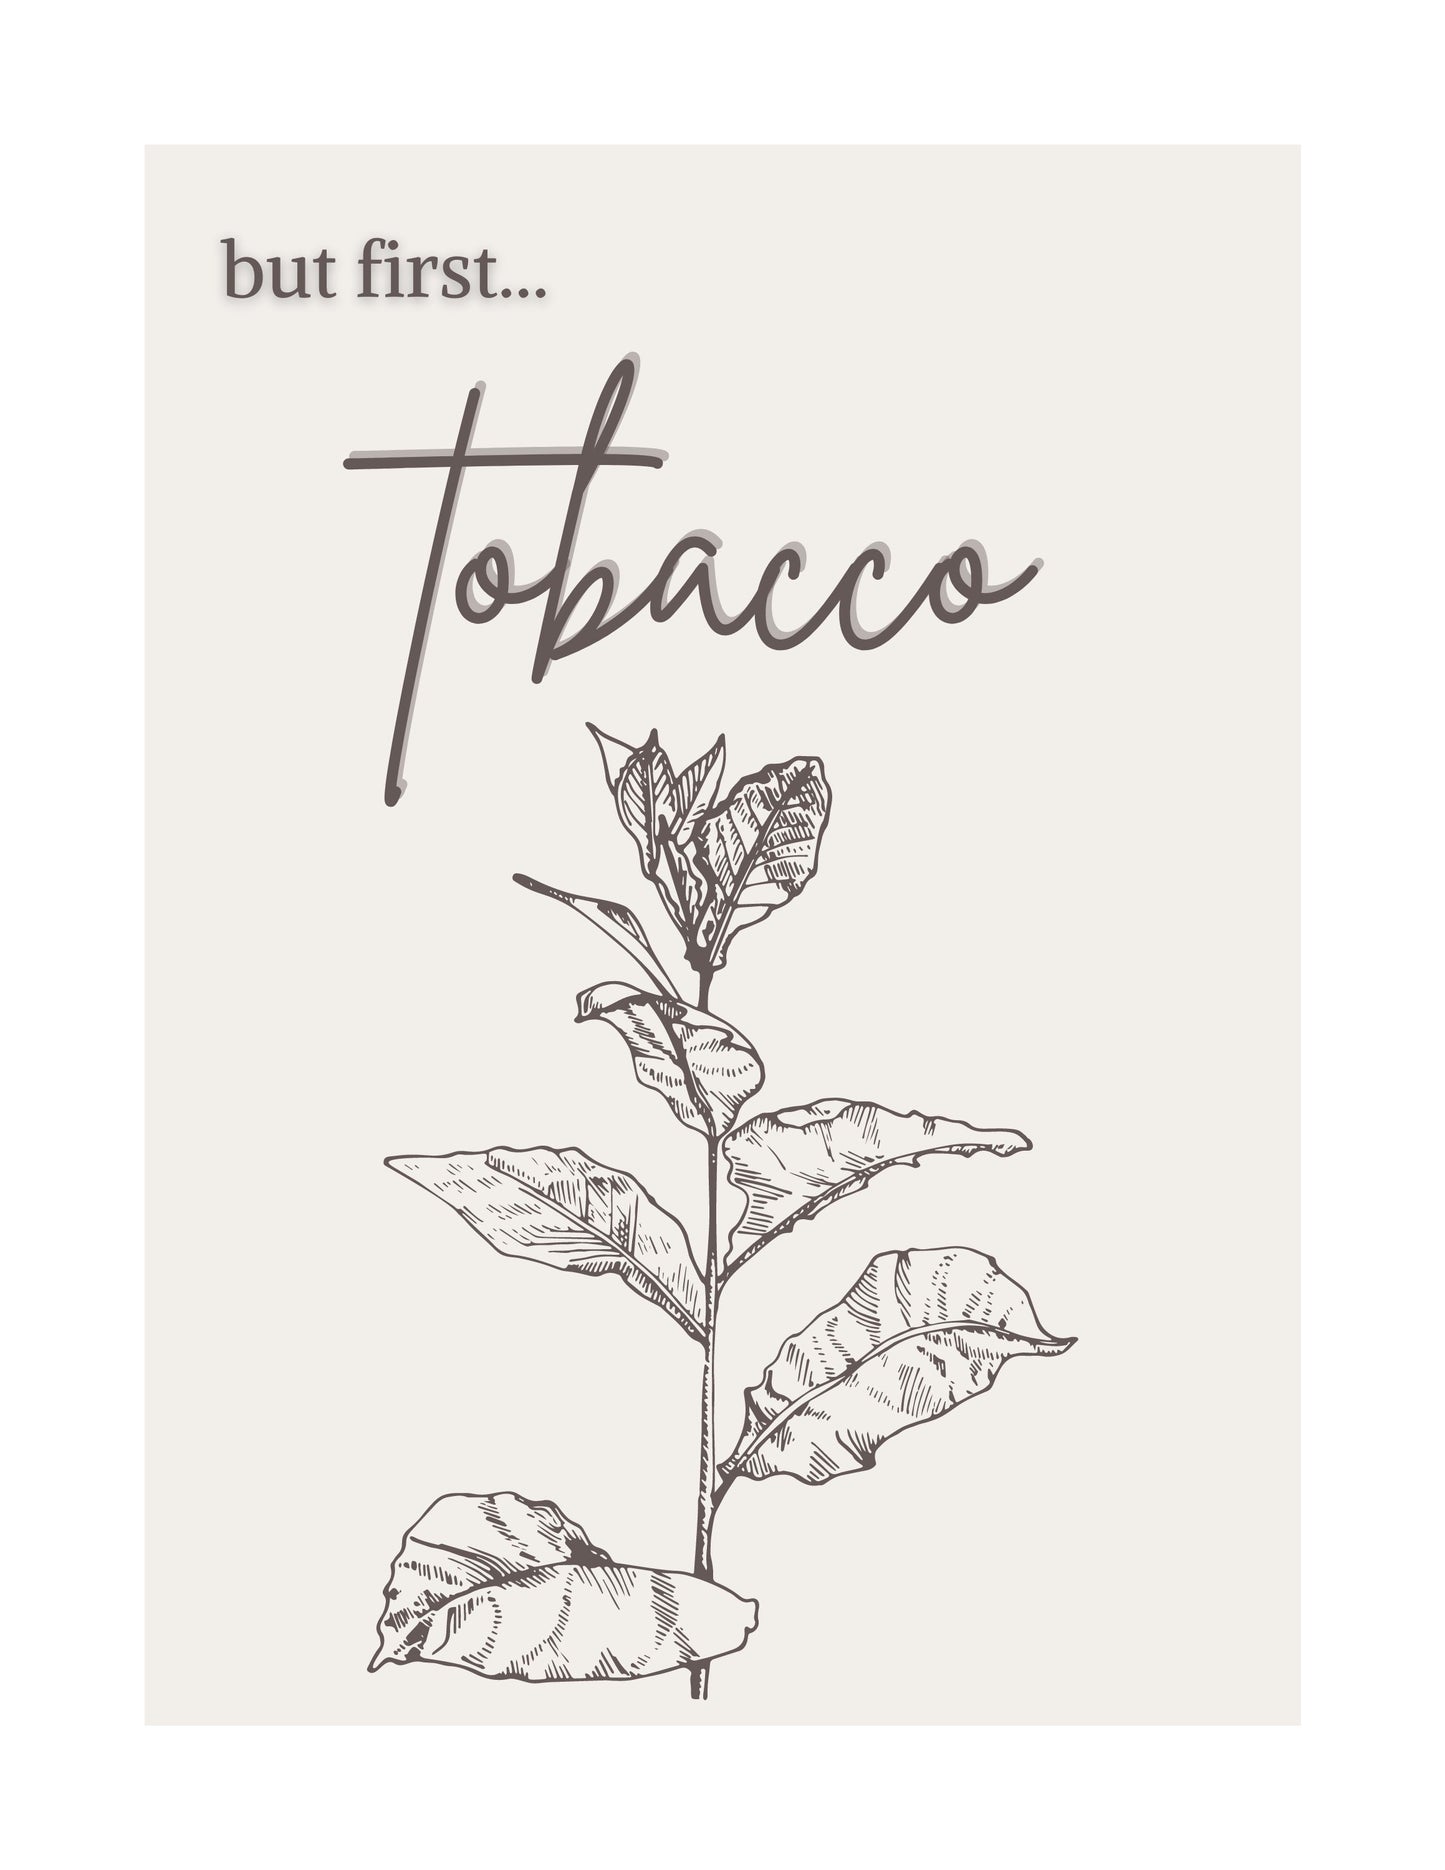 But First... Tobacco - Indigenous Art Print